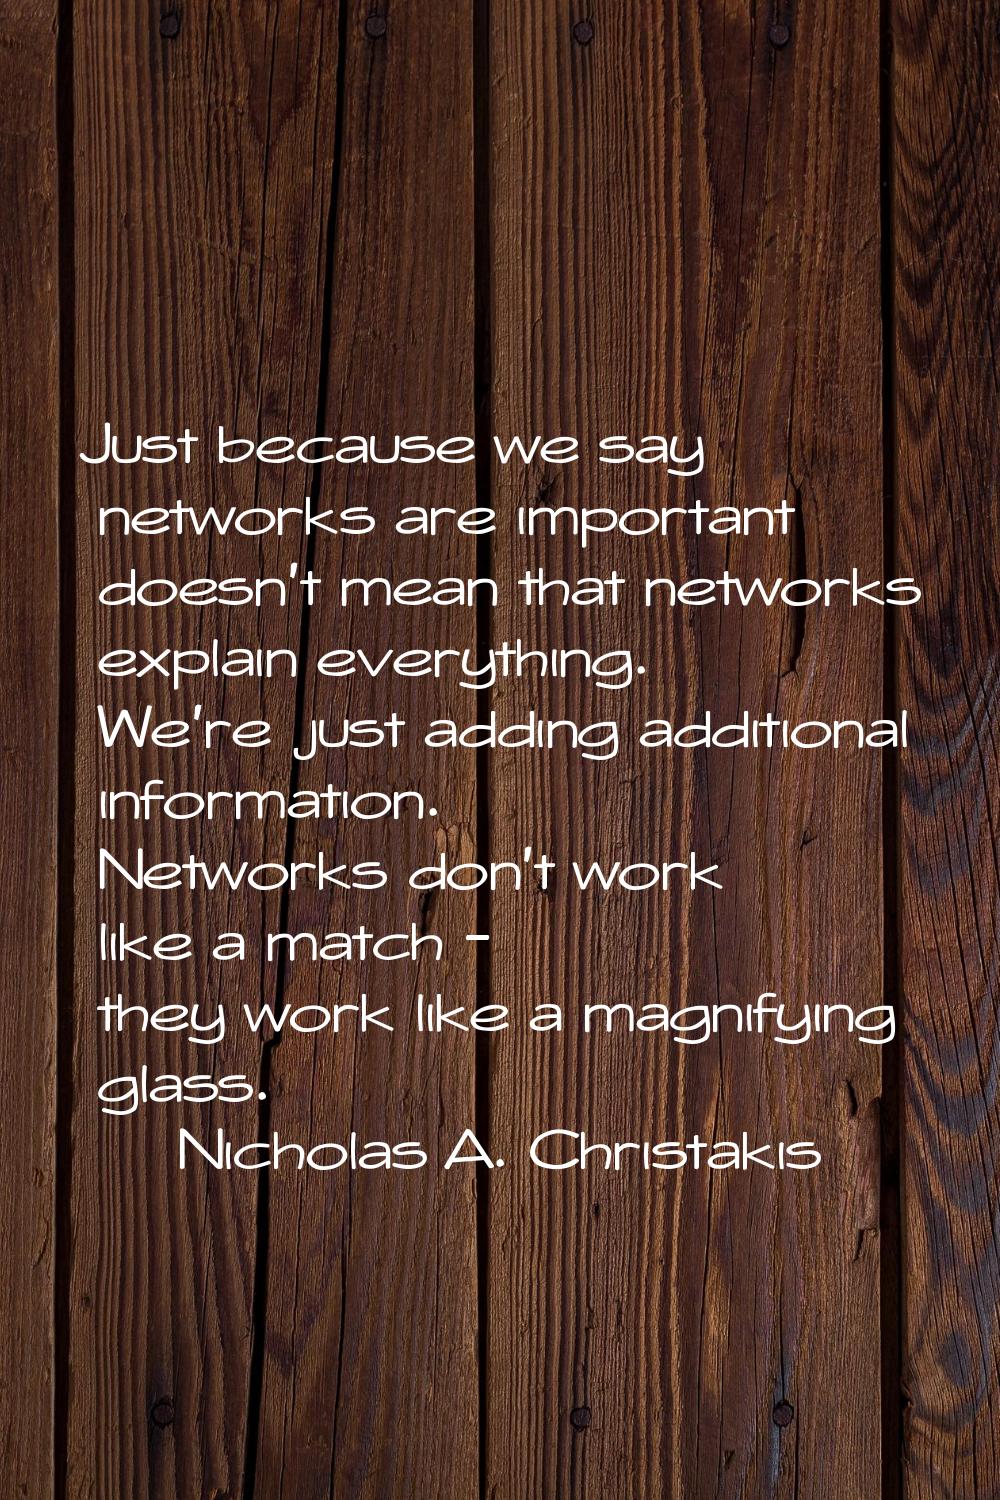 Just because we say networks are important doesn't mean that networks explain everything. We're jus